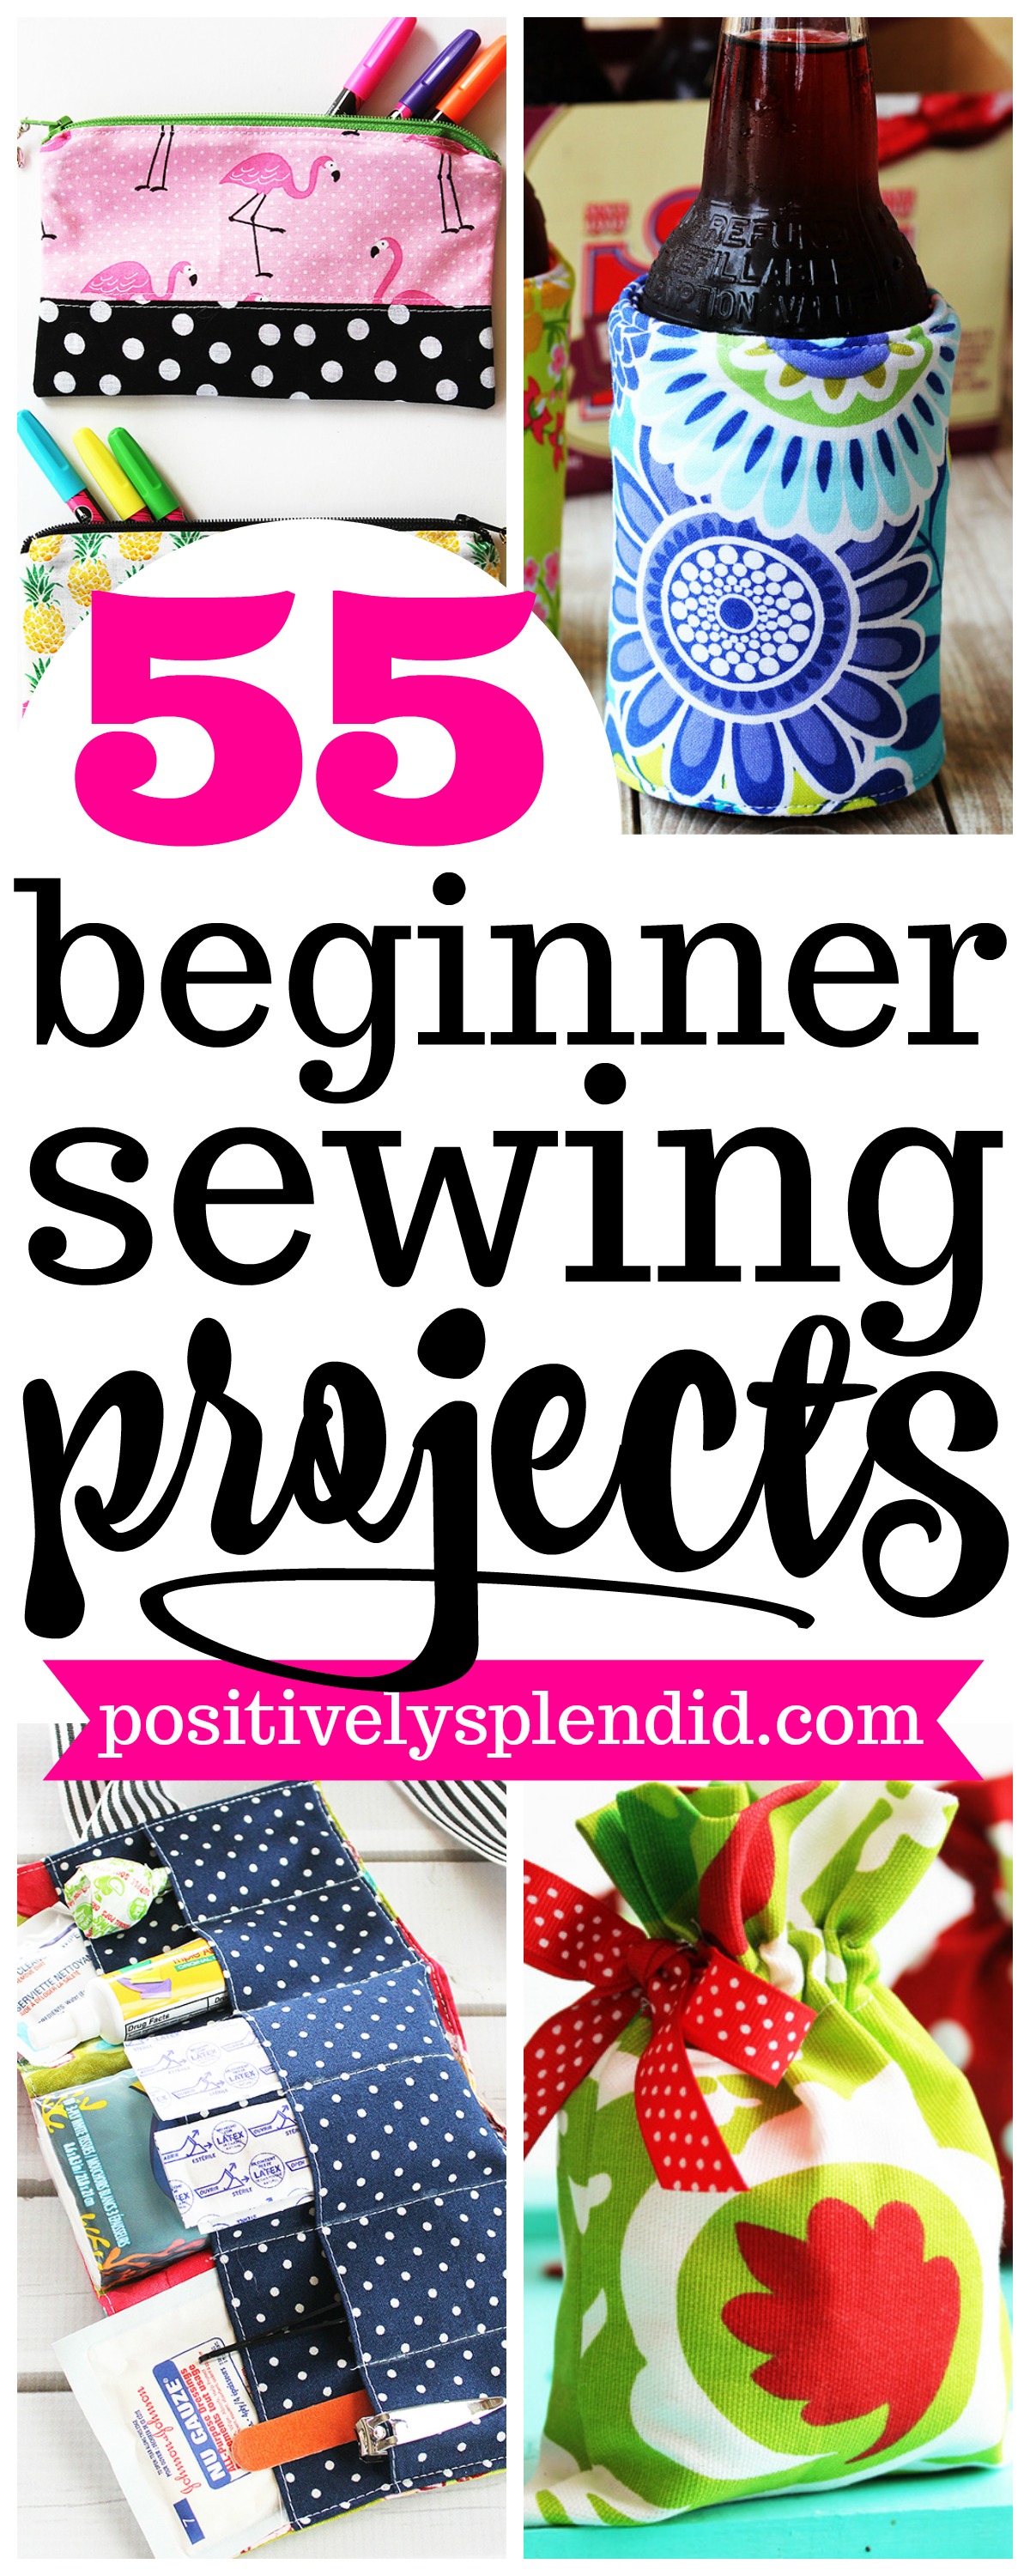 55 Easy Sewing Projects for Beginners - Positively Splendid